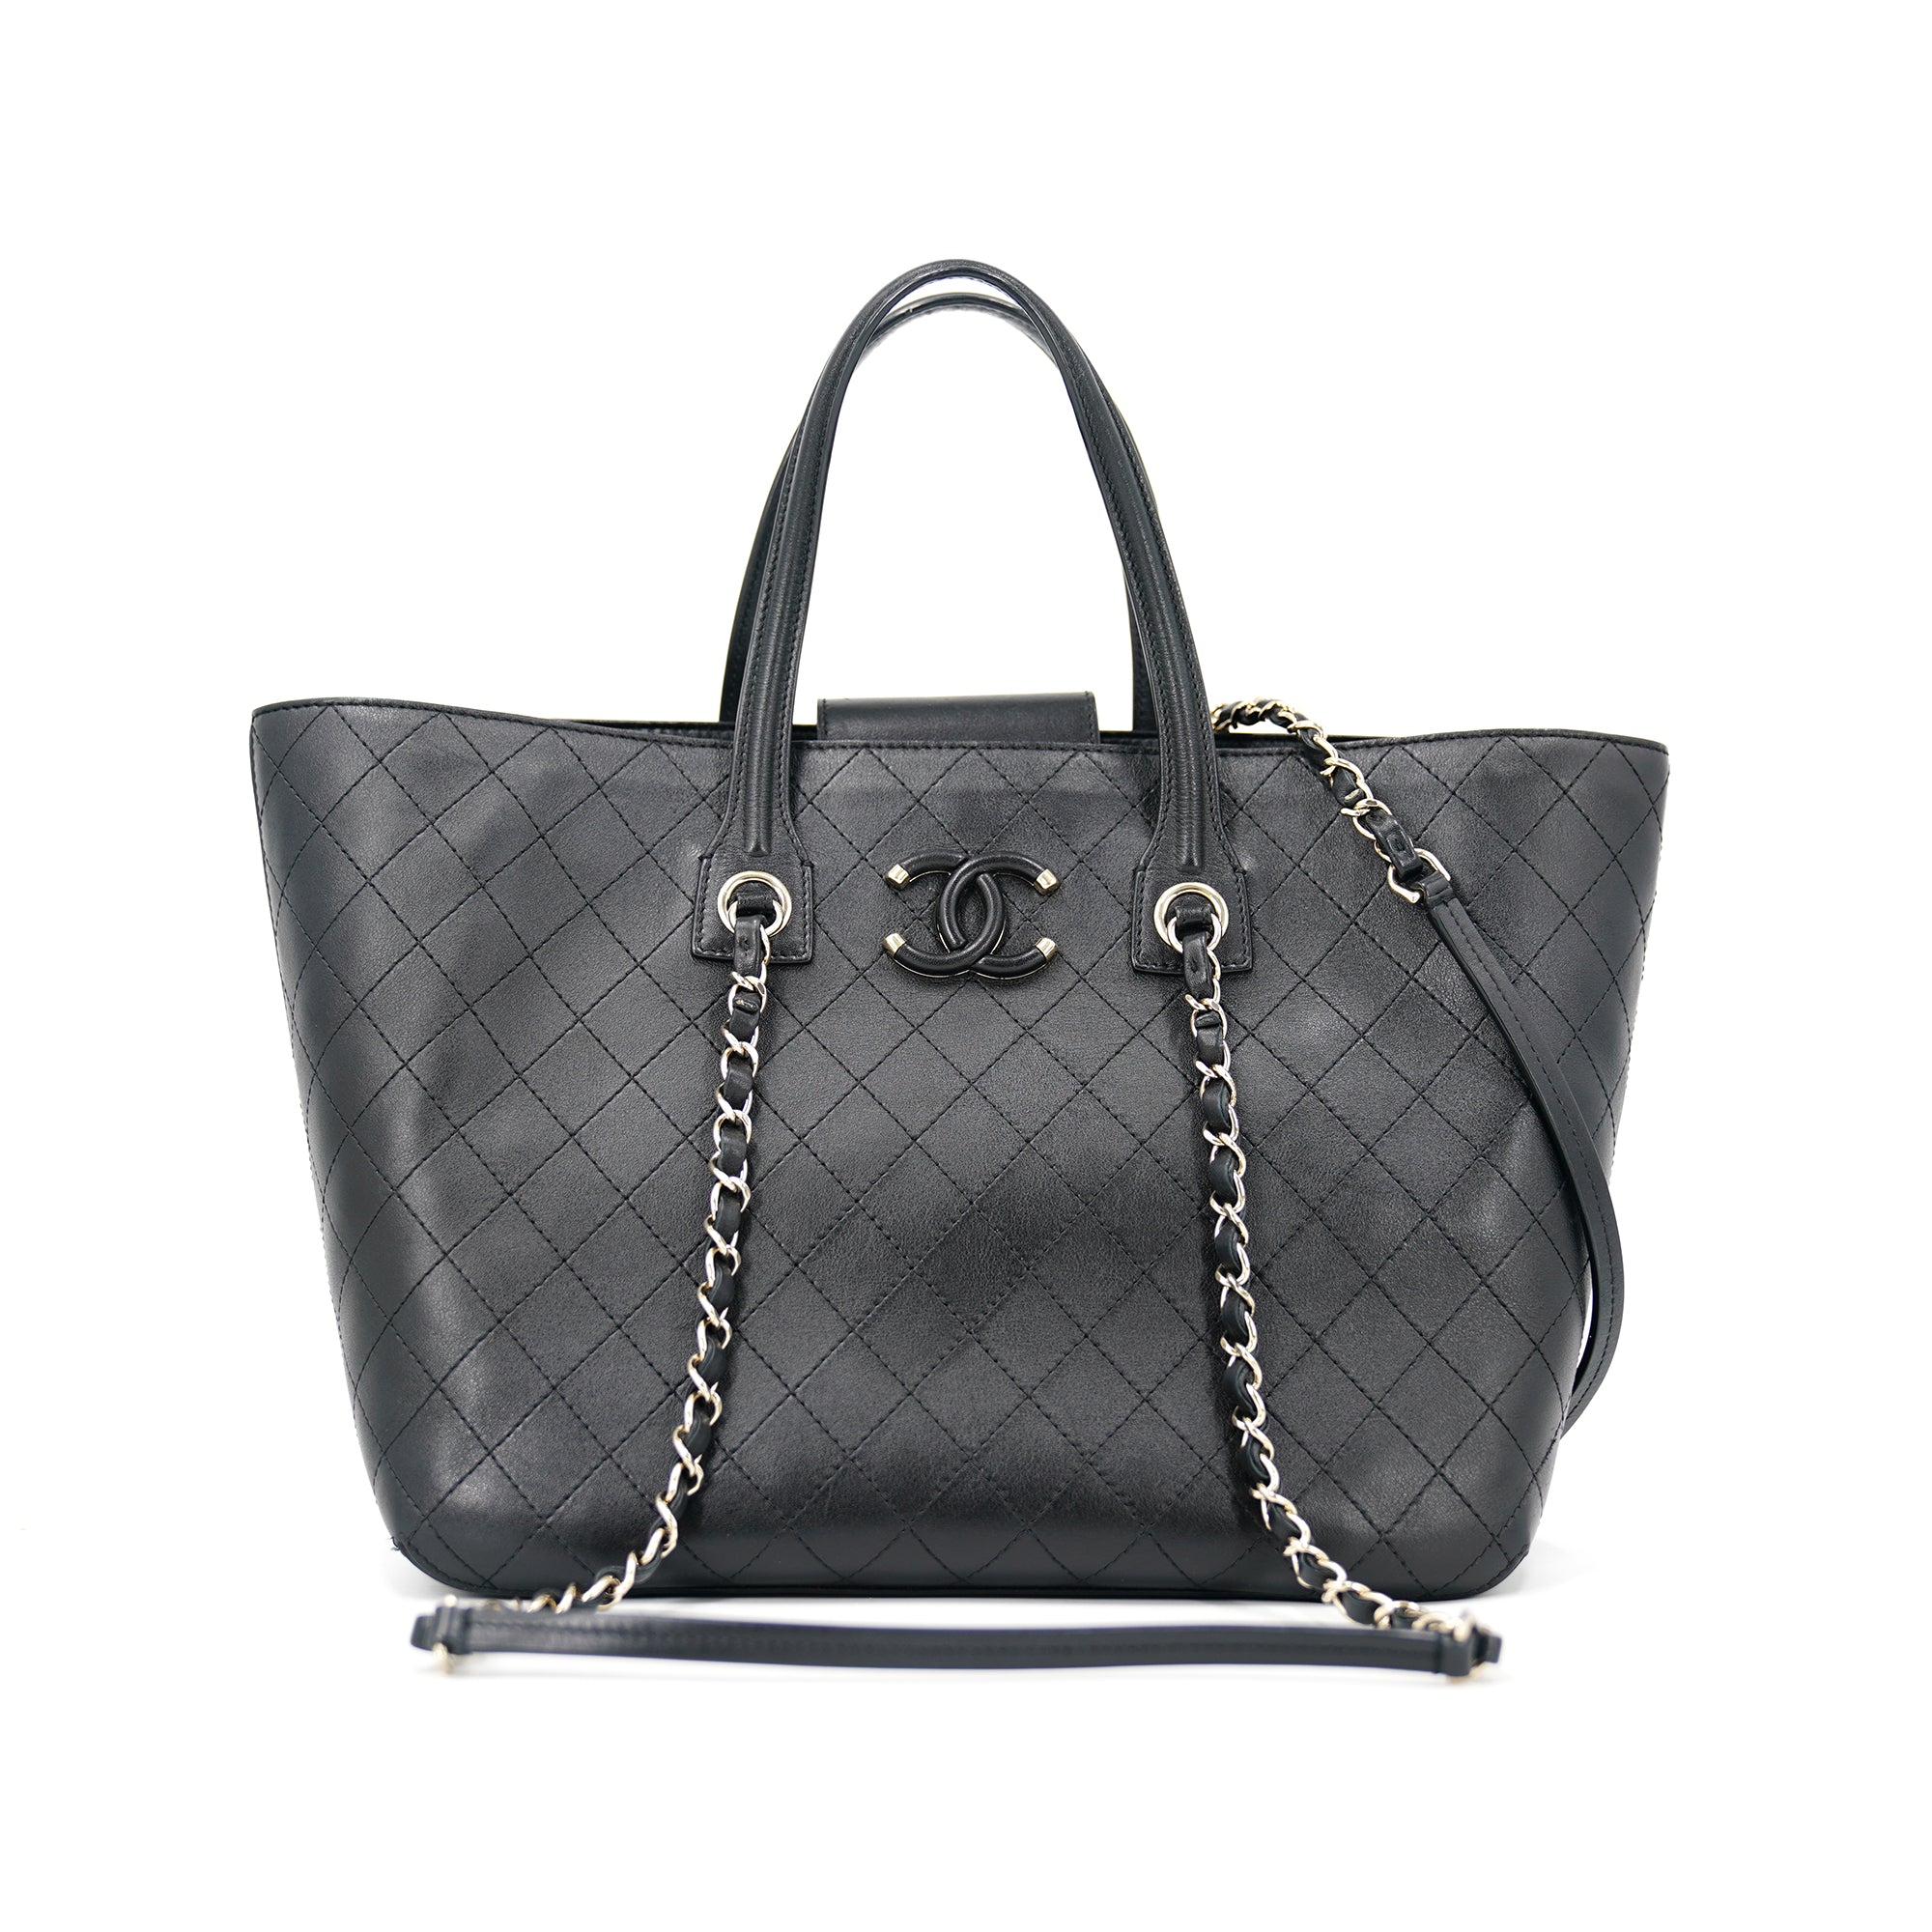 CC Quilted Leather Shopping Tote